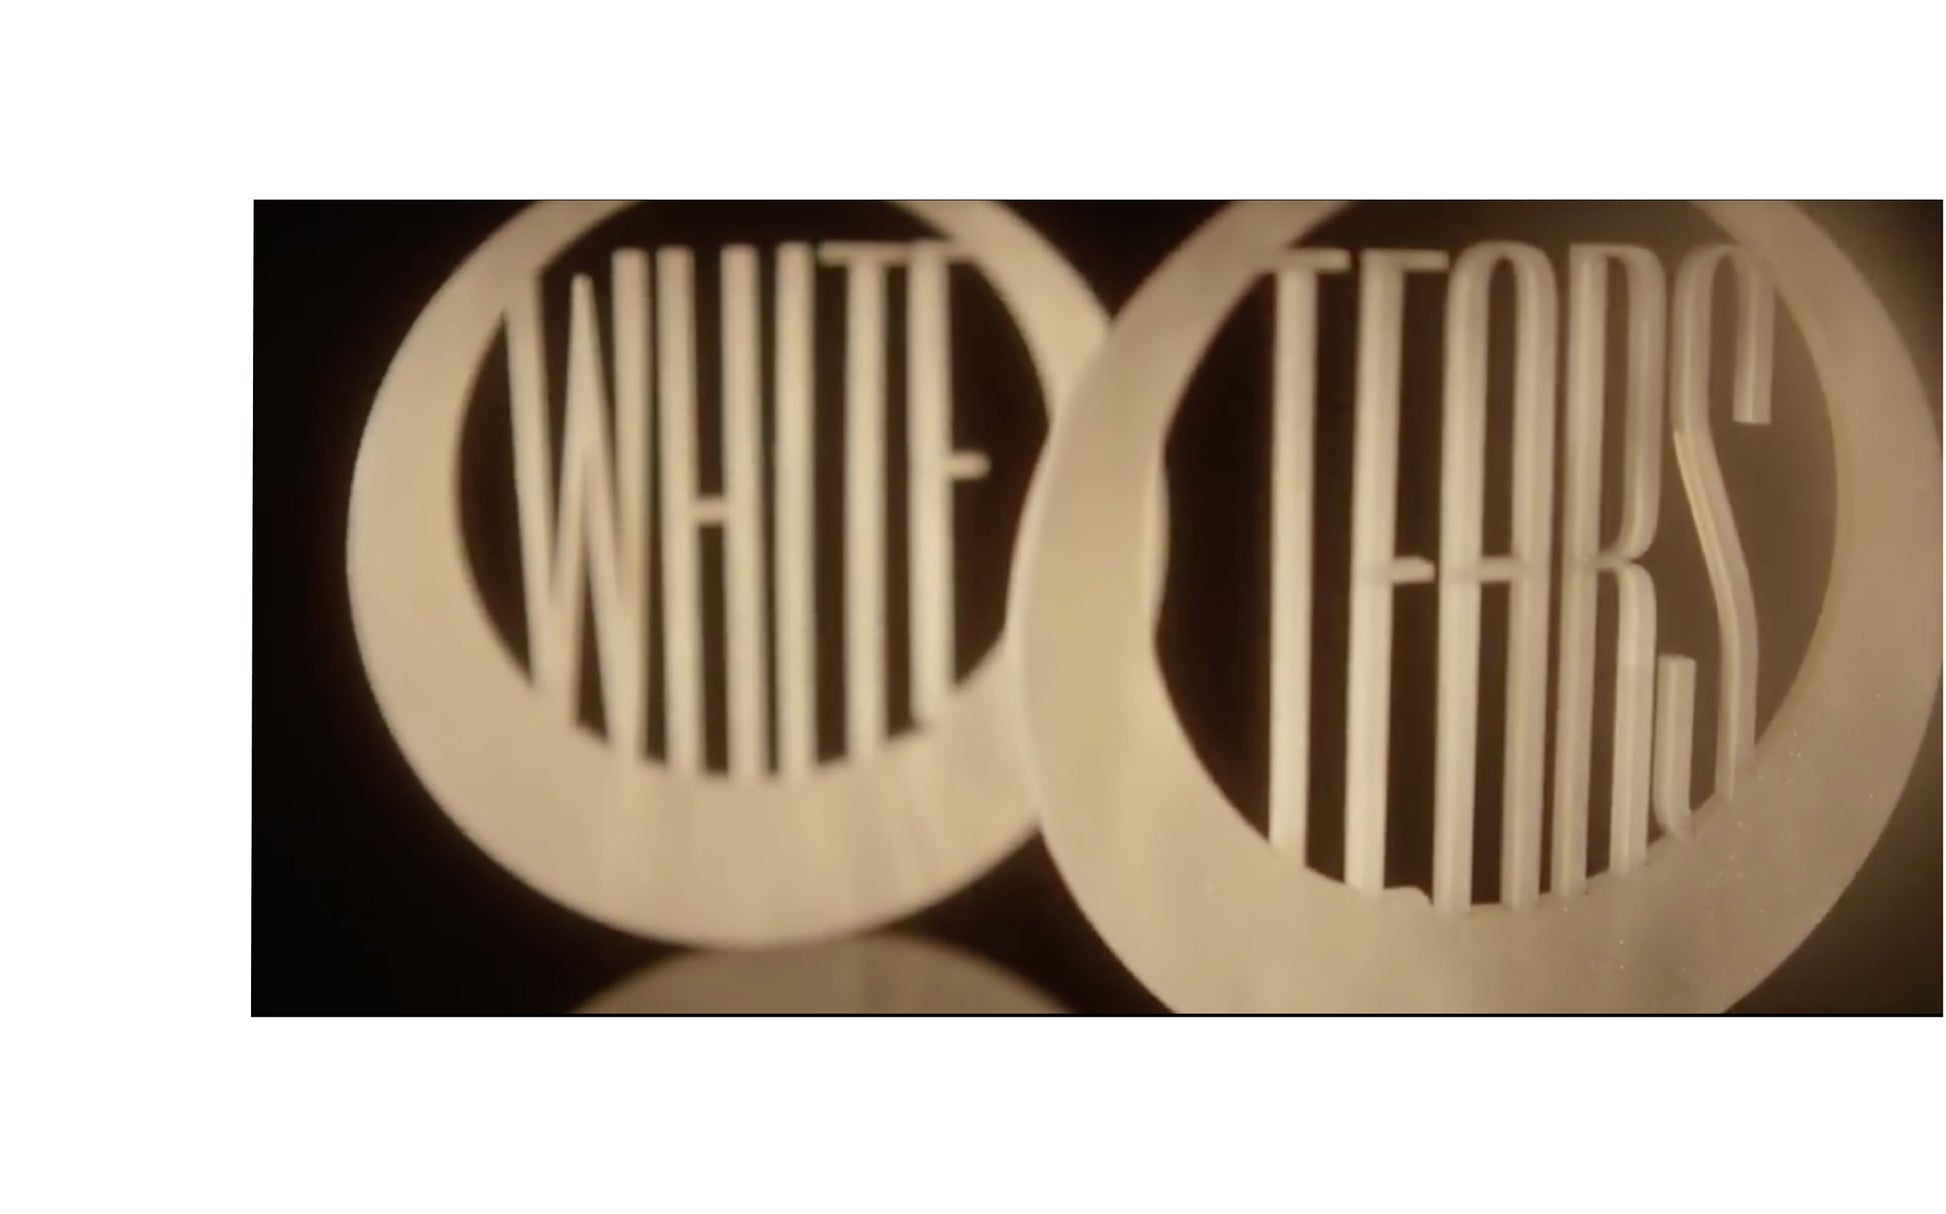 White pearlsheen round acrylic earrings, one earring reads the word WHITE and the other reads the word TEARS laser cut into the center of each earring. 